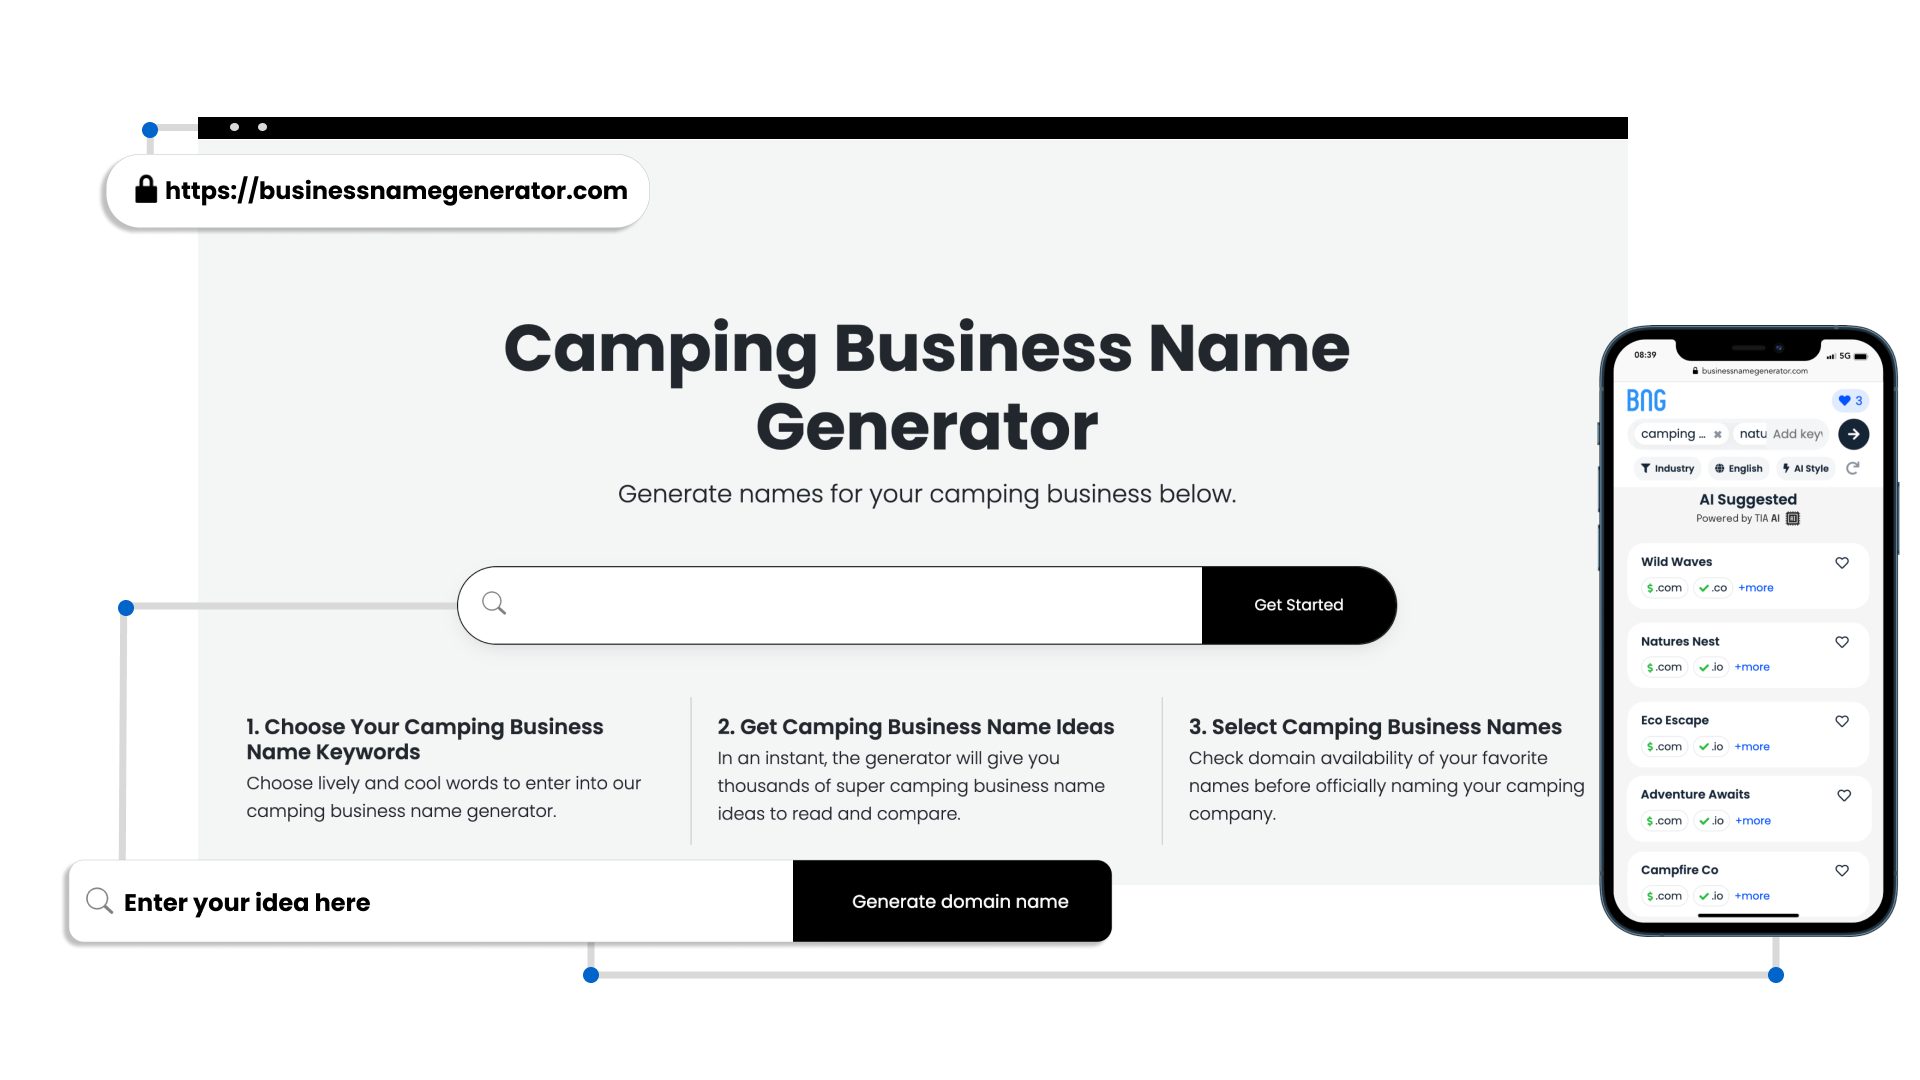 Benefits of Our Camping Business Name Generator